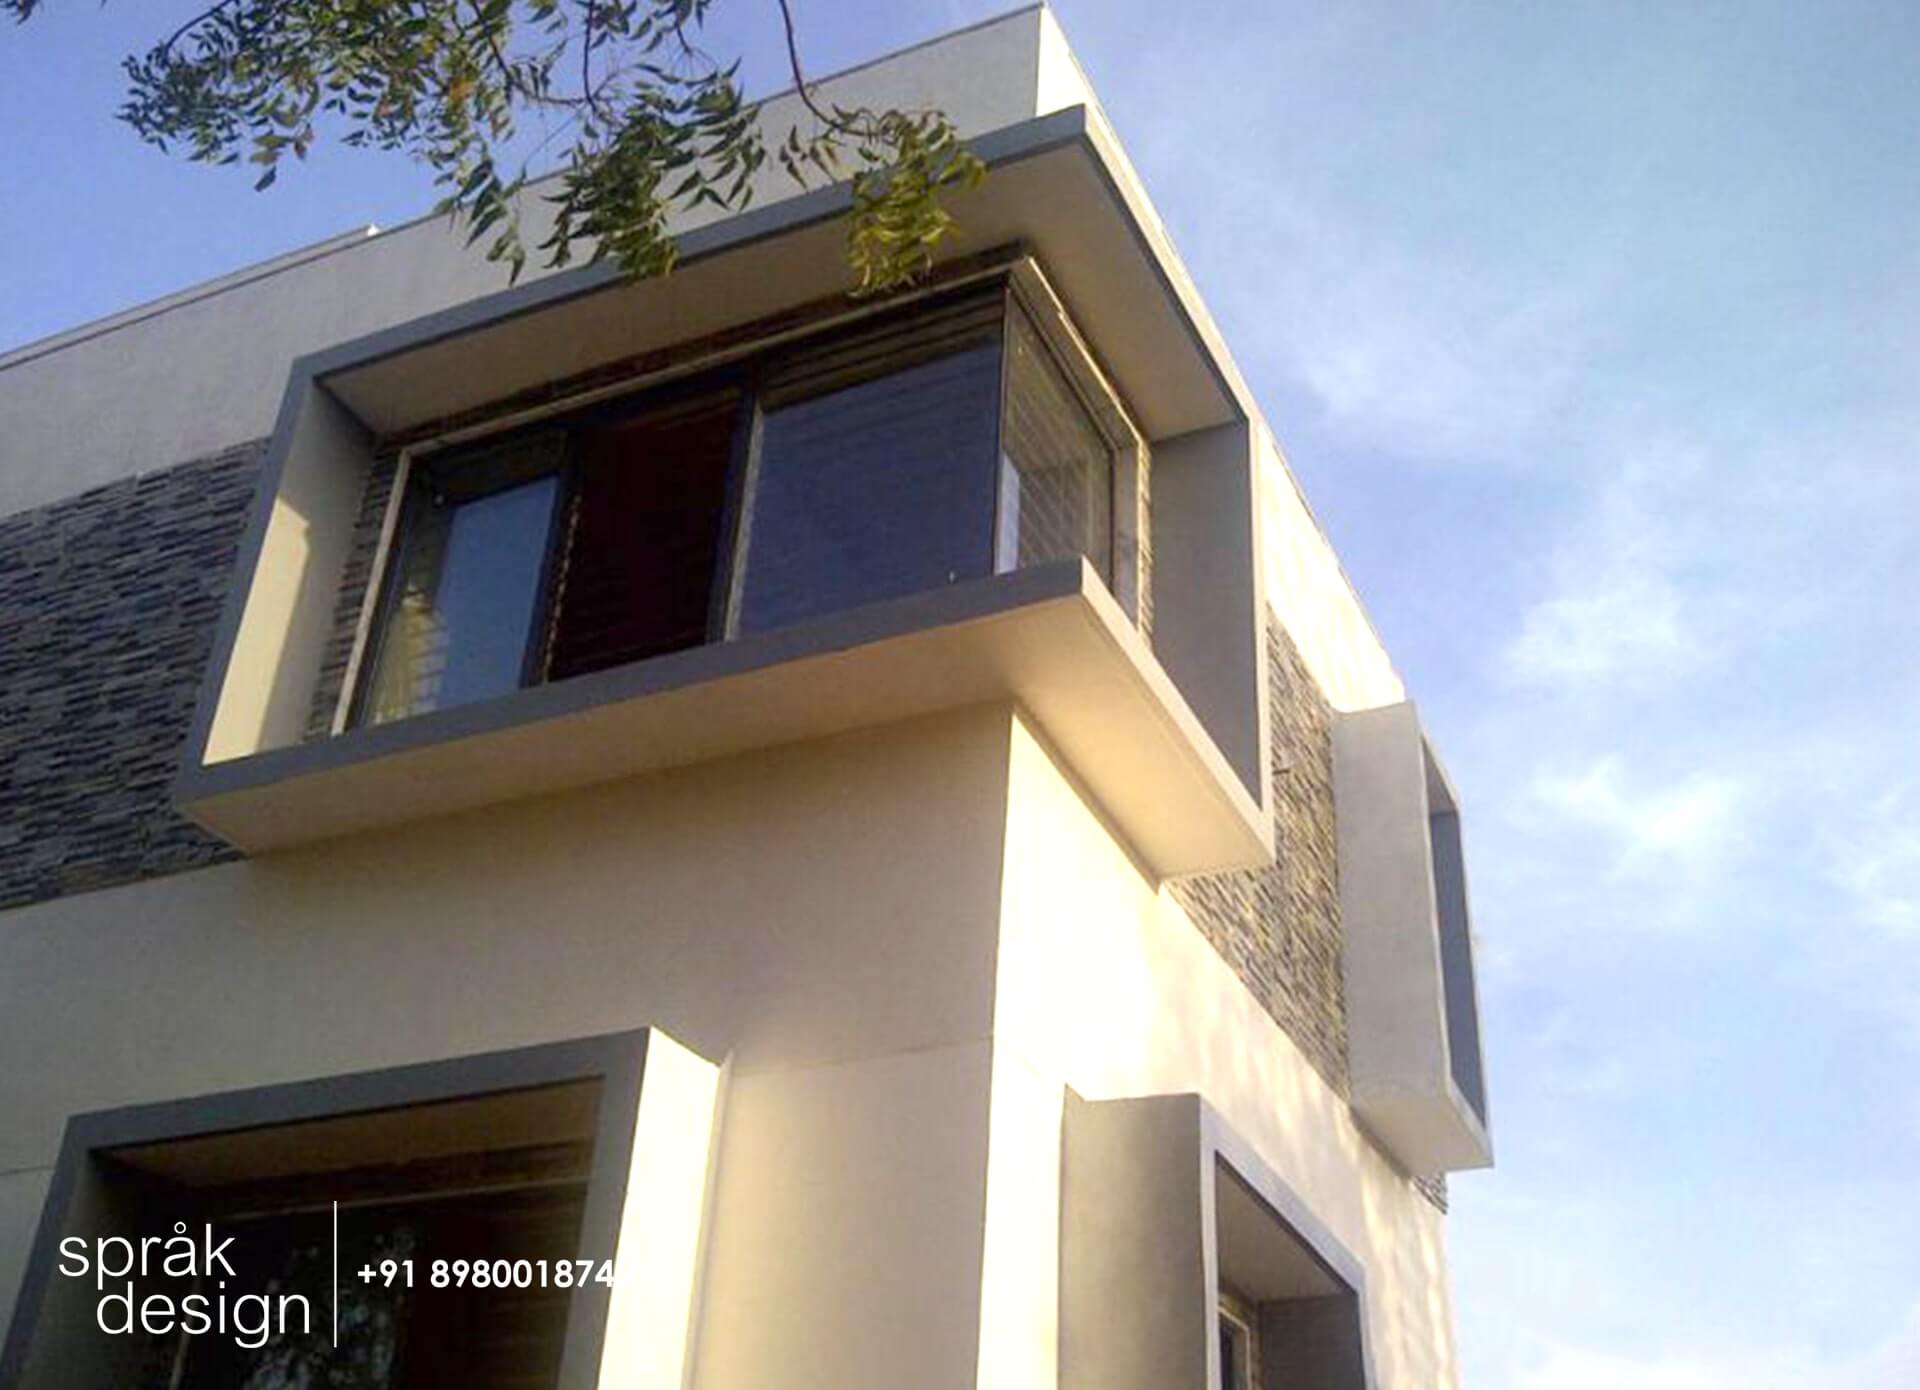 palbhoomi residence architecture and interior design outer view